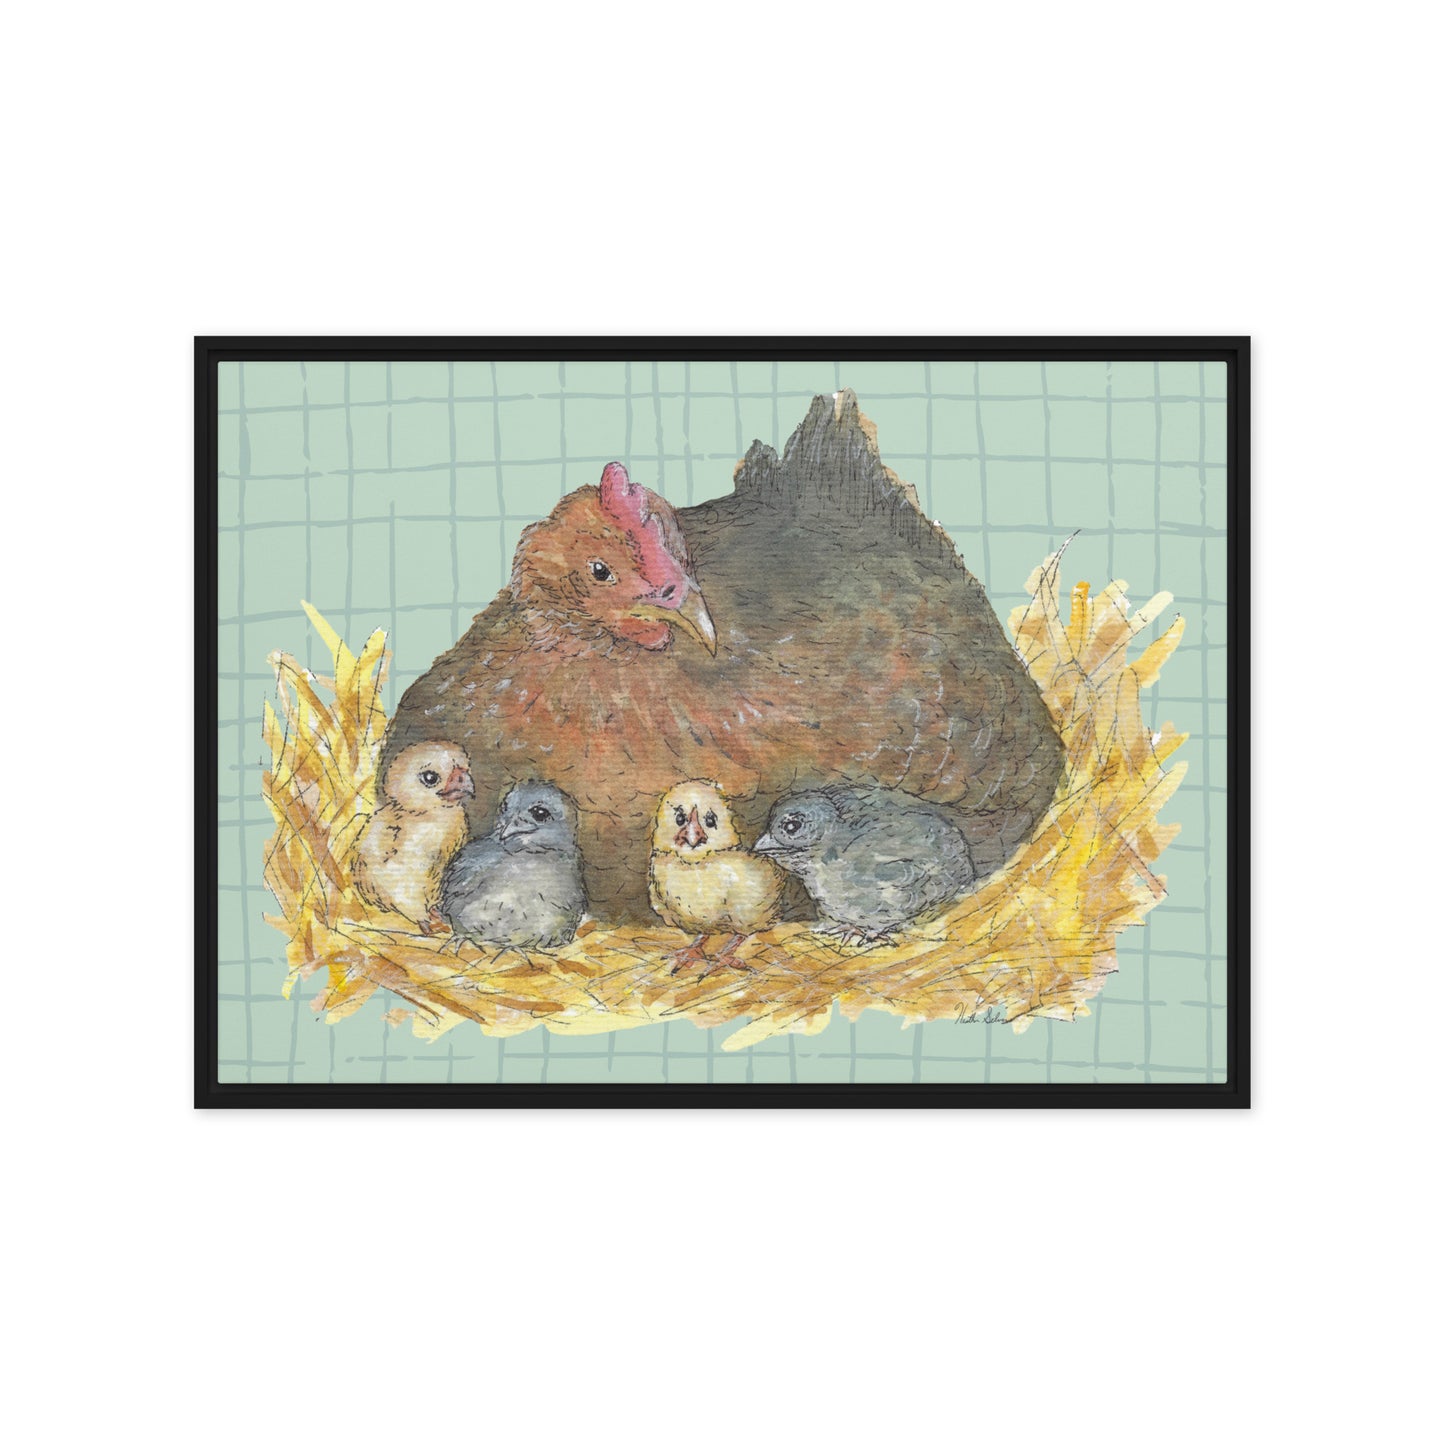 20 by 28 inch Mother Hen Floating Frame Canvas Wall Art. Heather Silver's watercolor painting, Mother Hen, with a green crosshatched background, printed on a stretched canvas and framed with a dark black pine frame. Hanging hardware included.